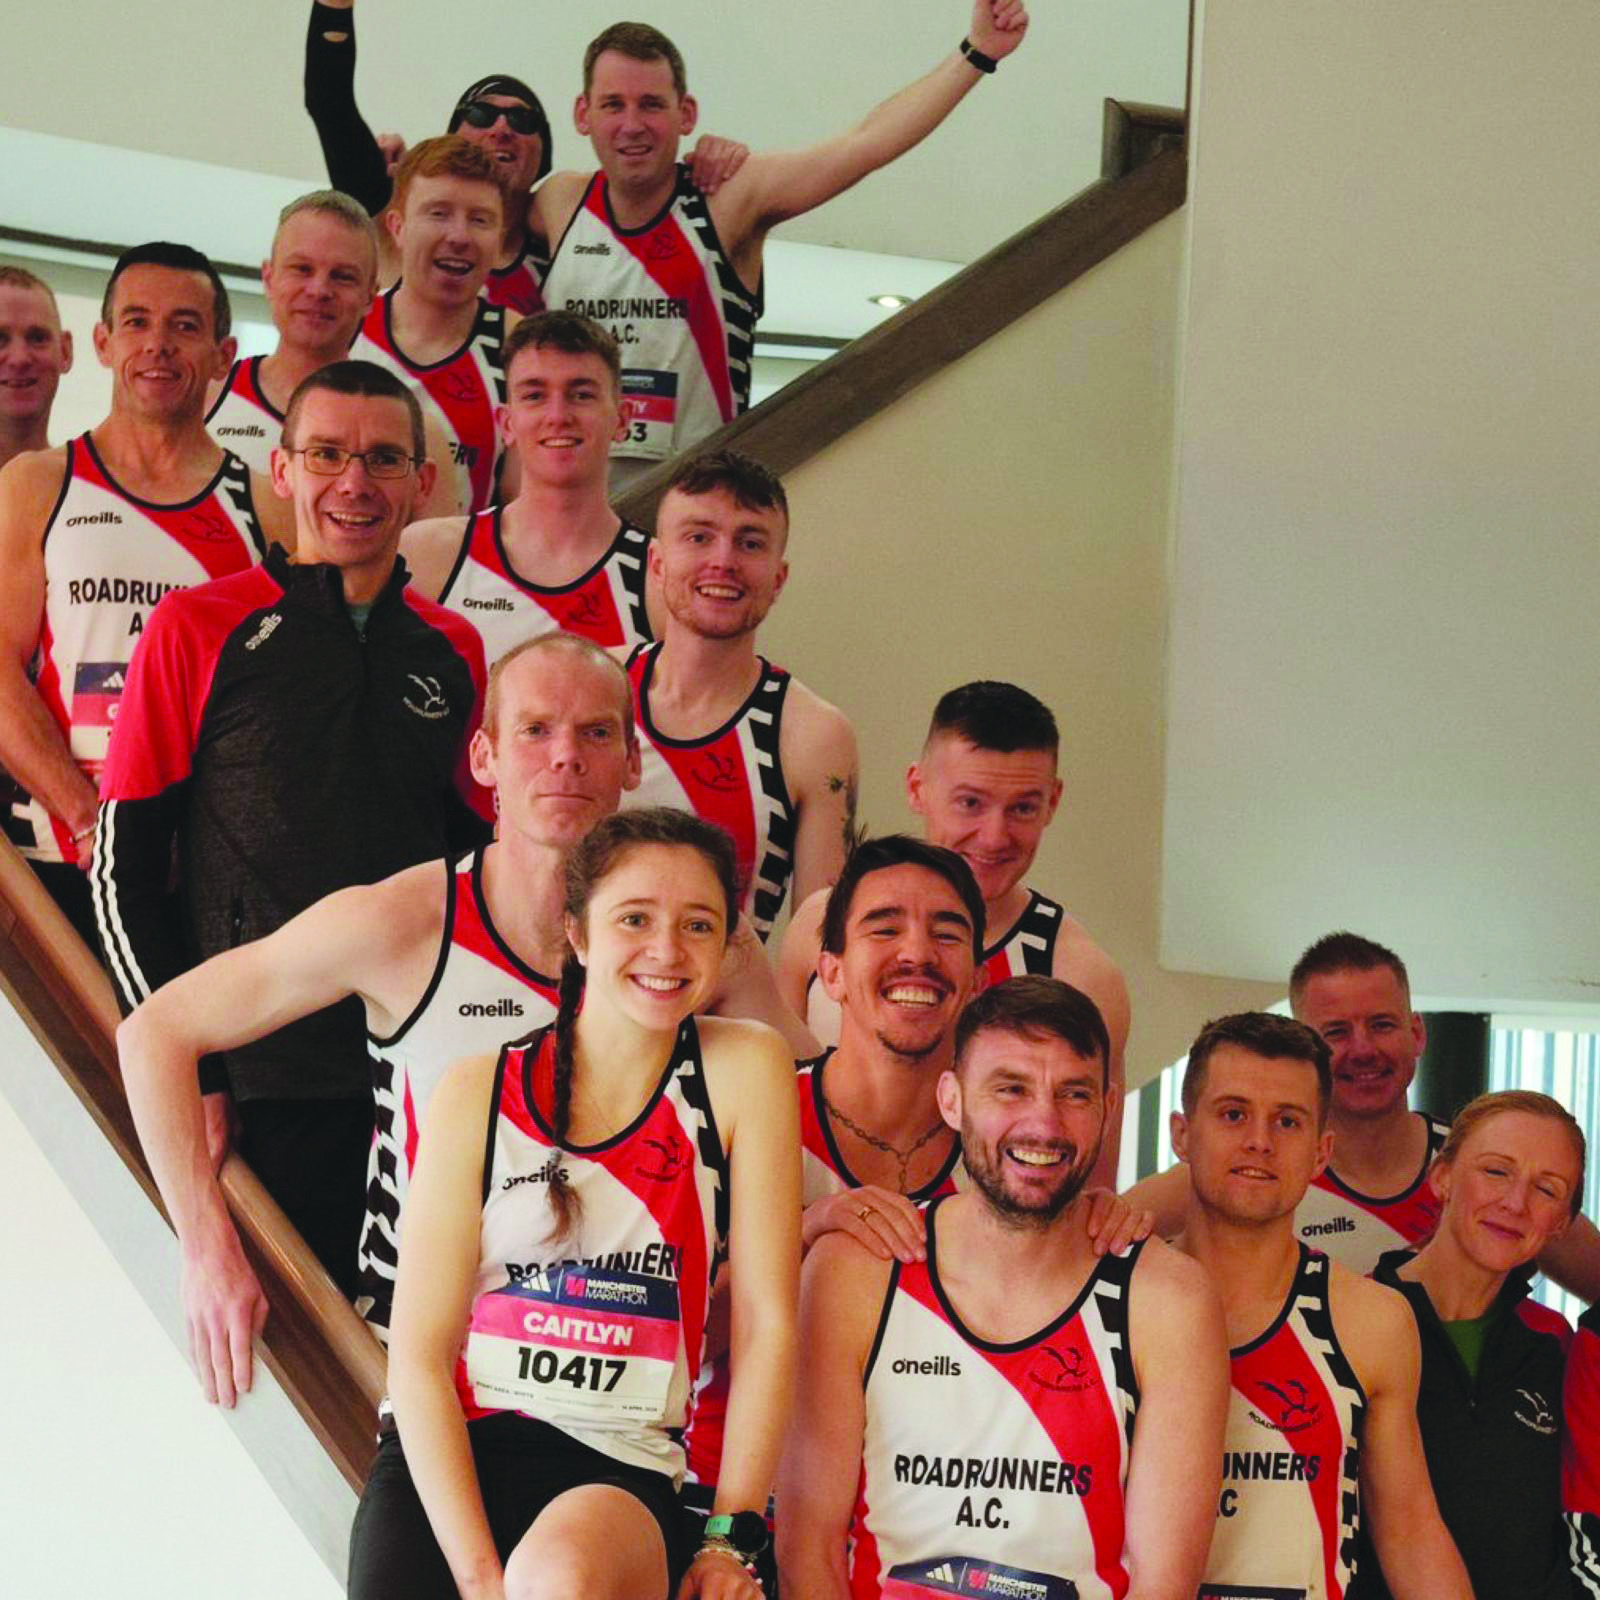 Roadrunners AC members gearing up for the recent Manchester Marathon. The club is set to host ‘Mazerunner’ on August 2 with a 3k fun run, plus 5k and 10k races that are open to all